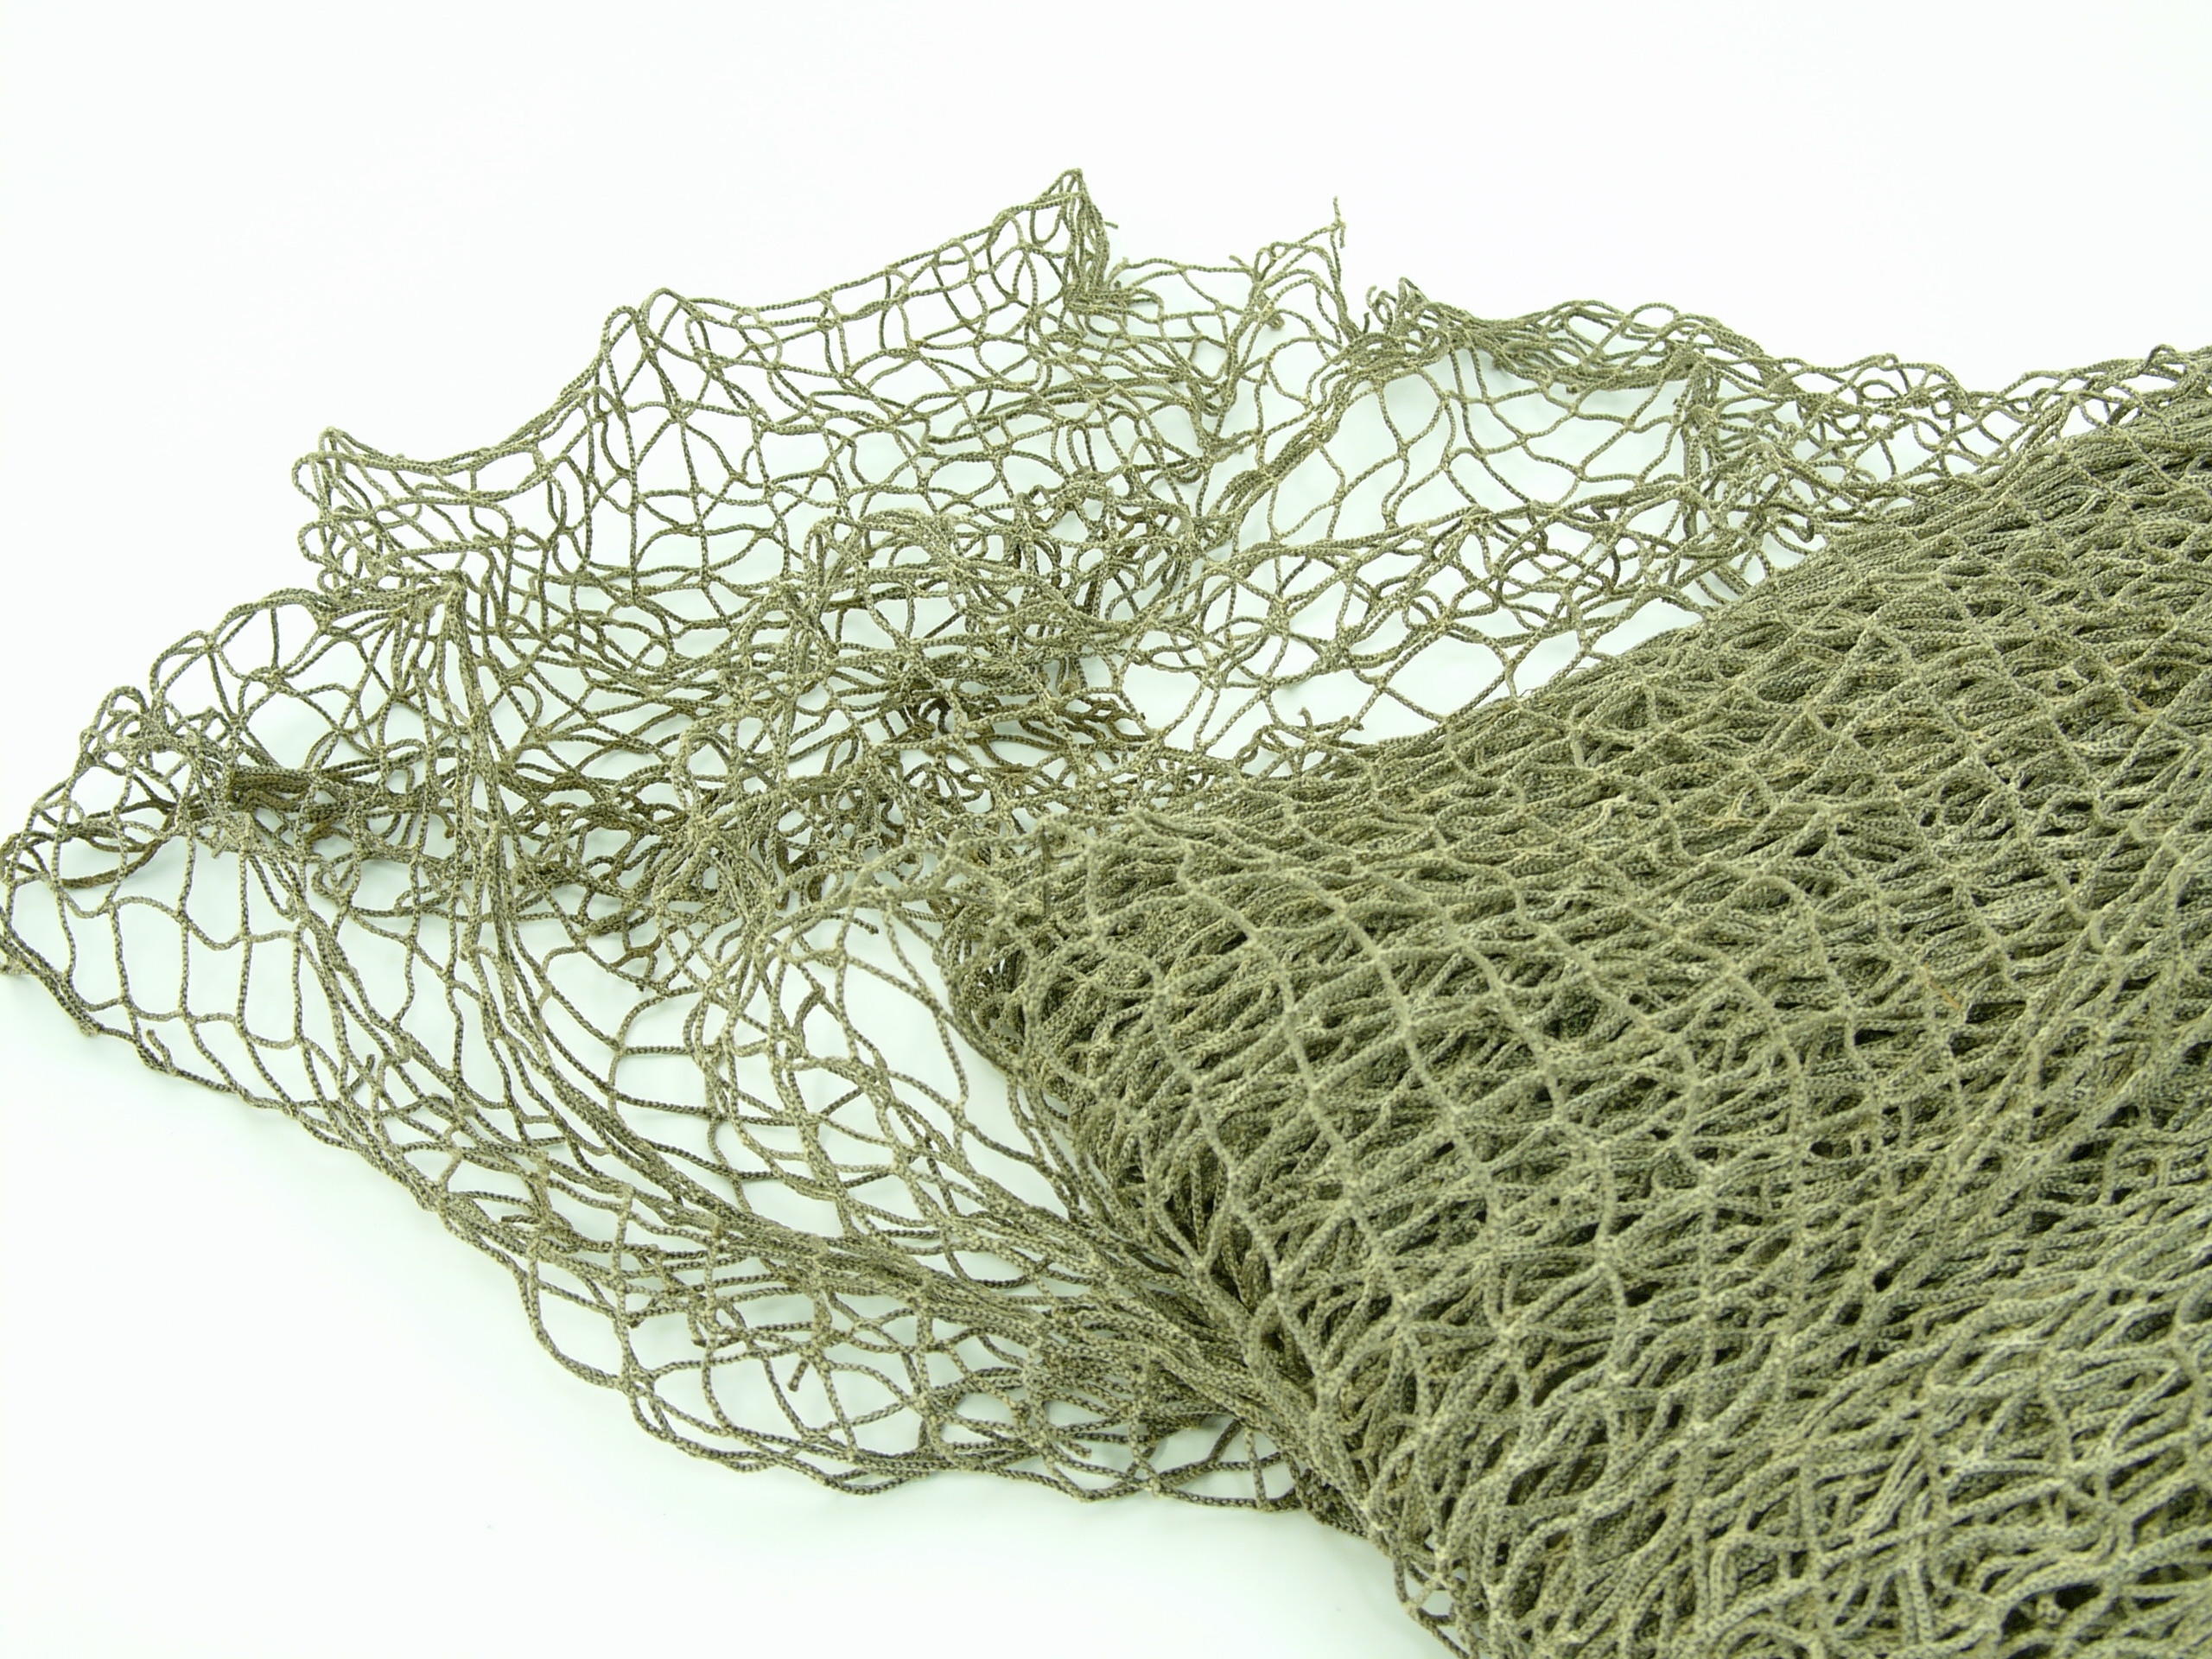 5 Surprising Facts You Didn't Know About Fishing Nets | Blogs Now